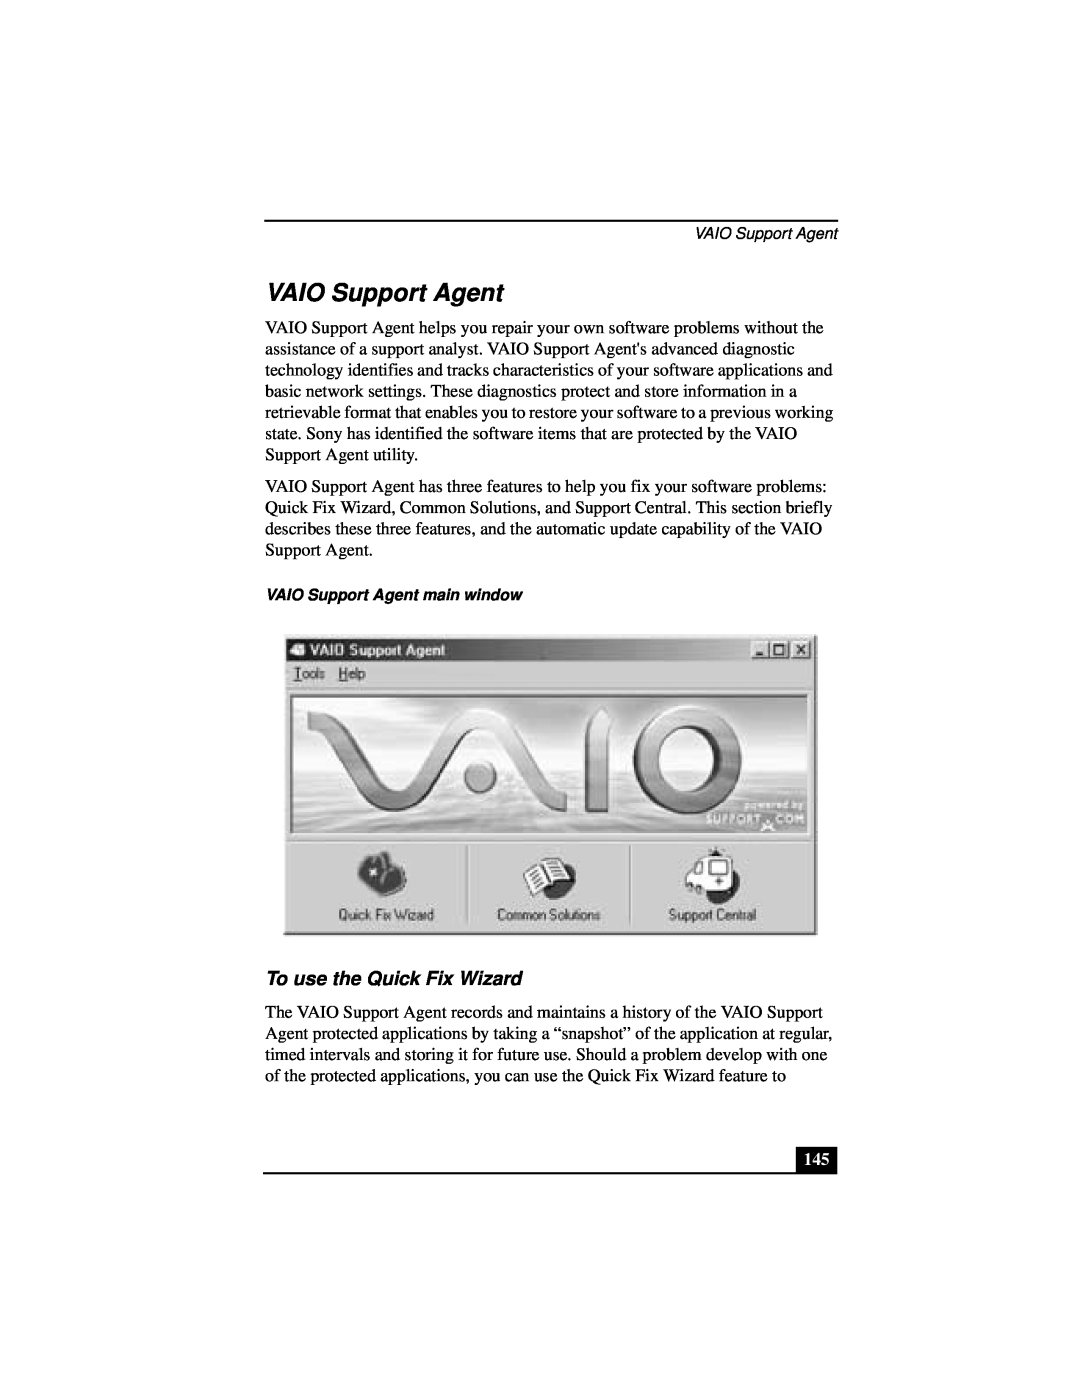 Sony Notebook Computer manual VAIO Support Agent, To use the Quick Fix Wizard 